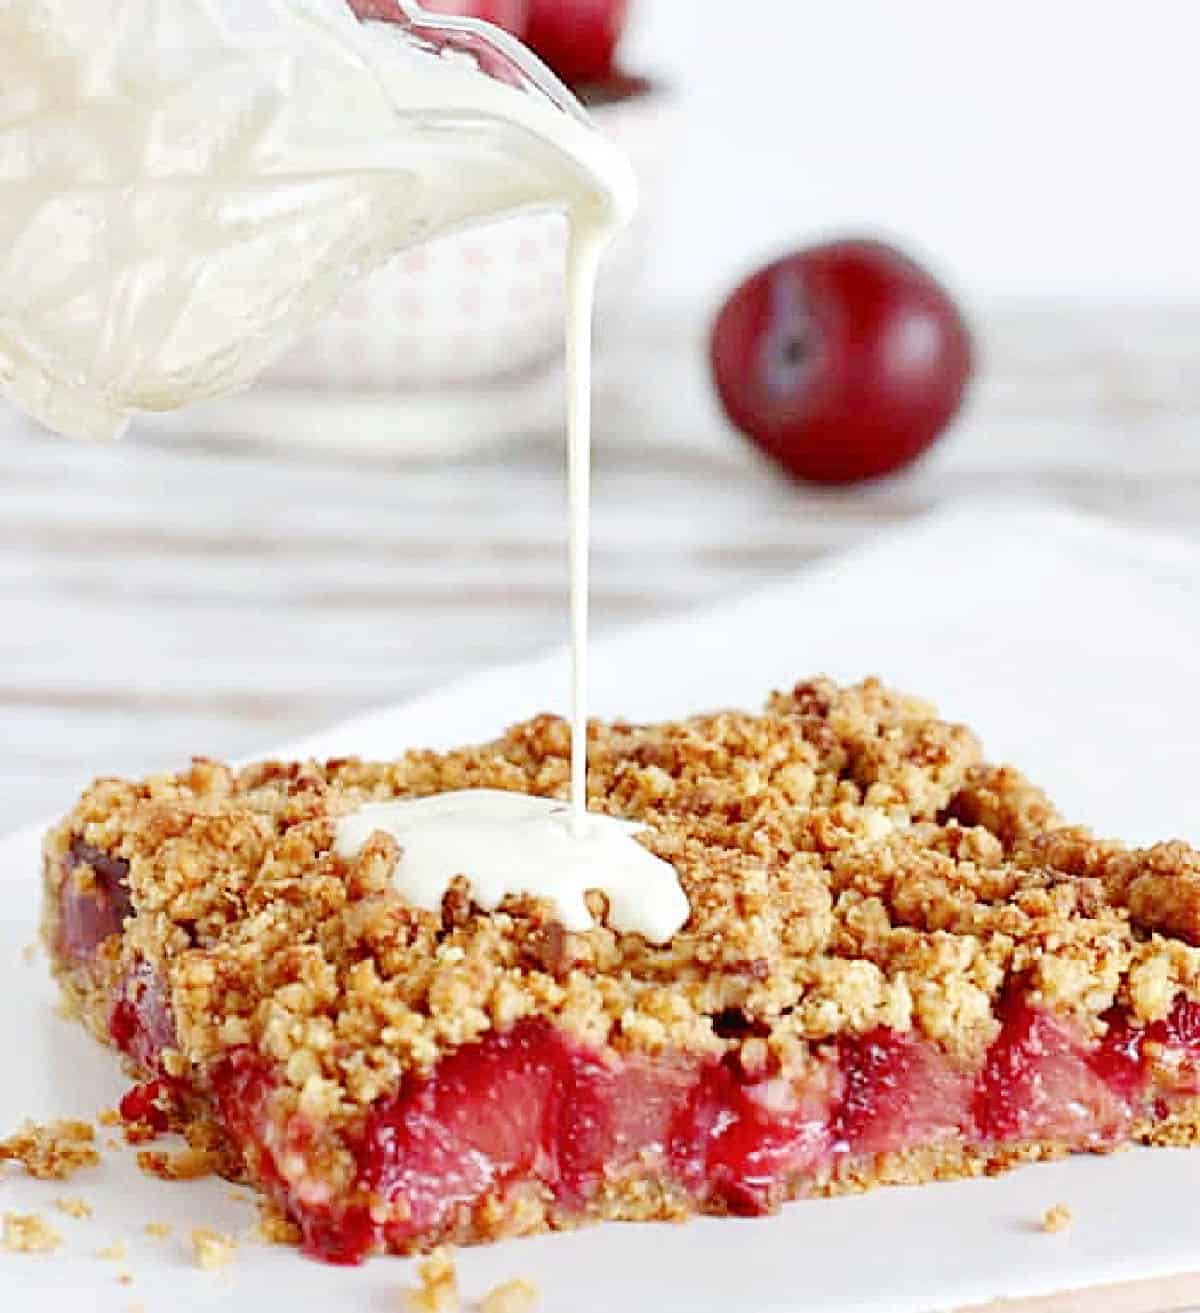 Pouring cream from jar on portion of plum crumb tart, white background with whole plum